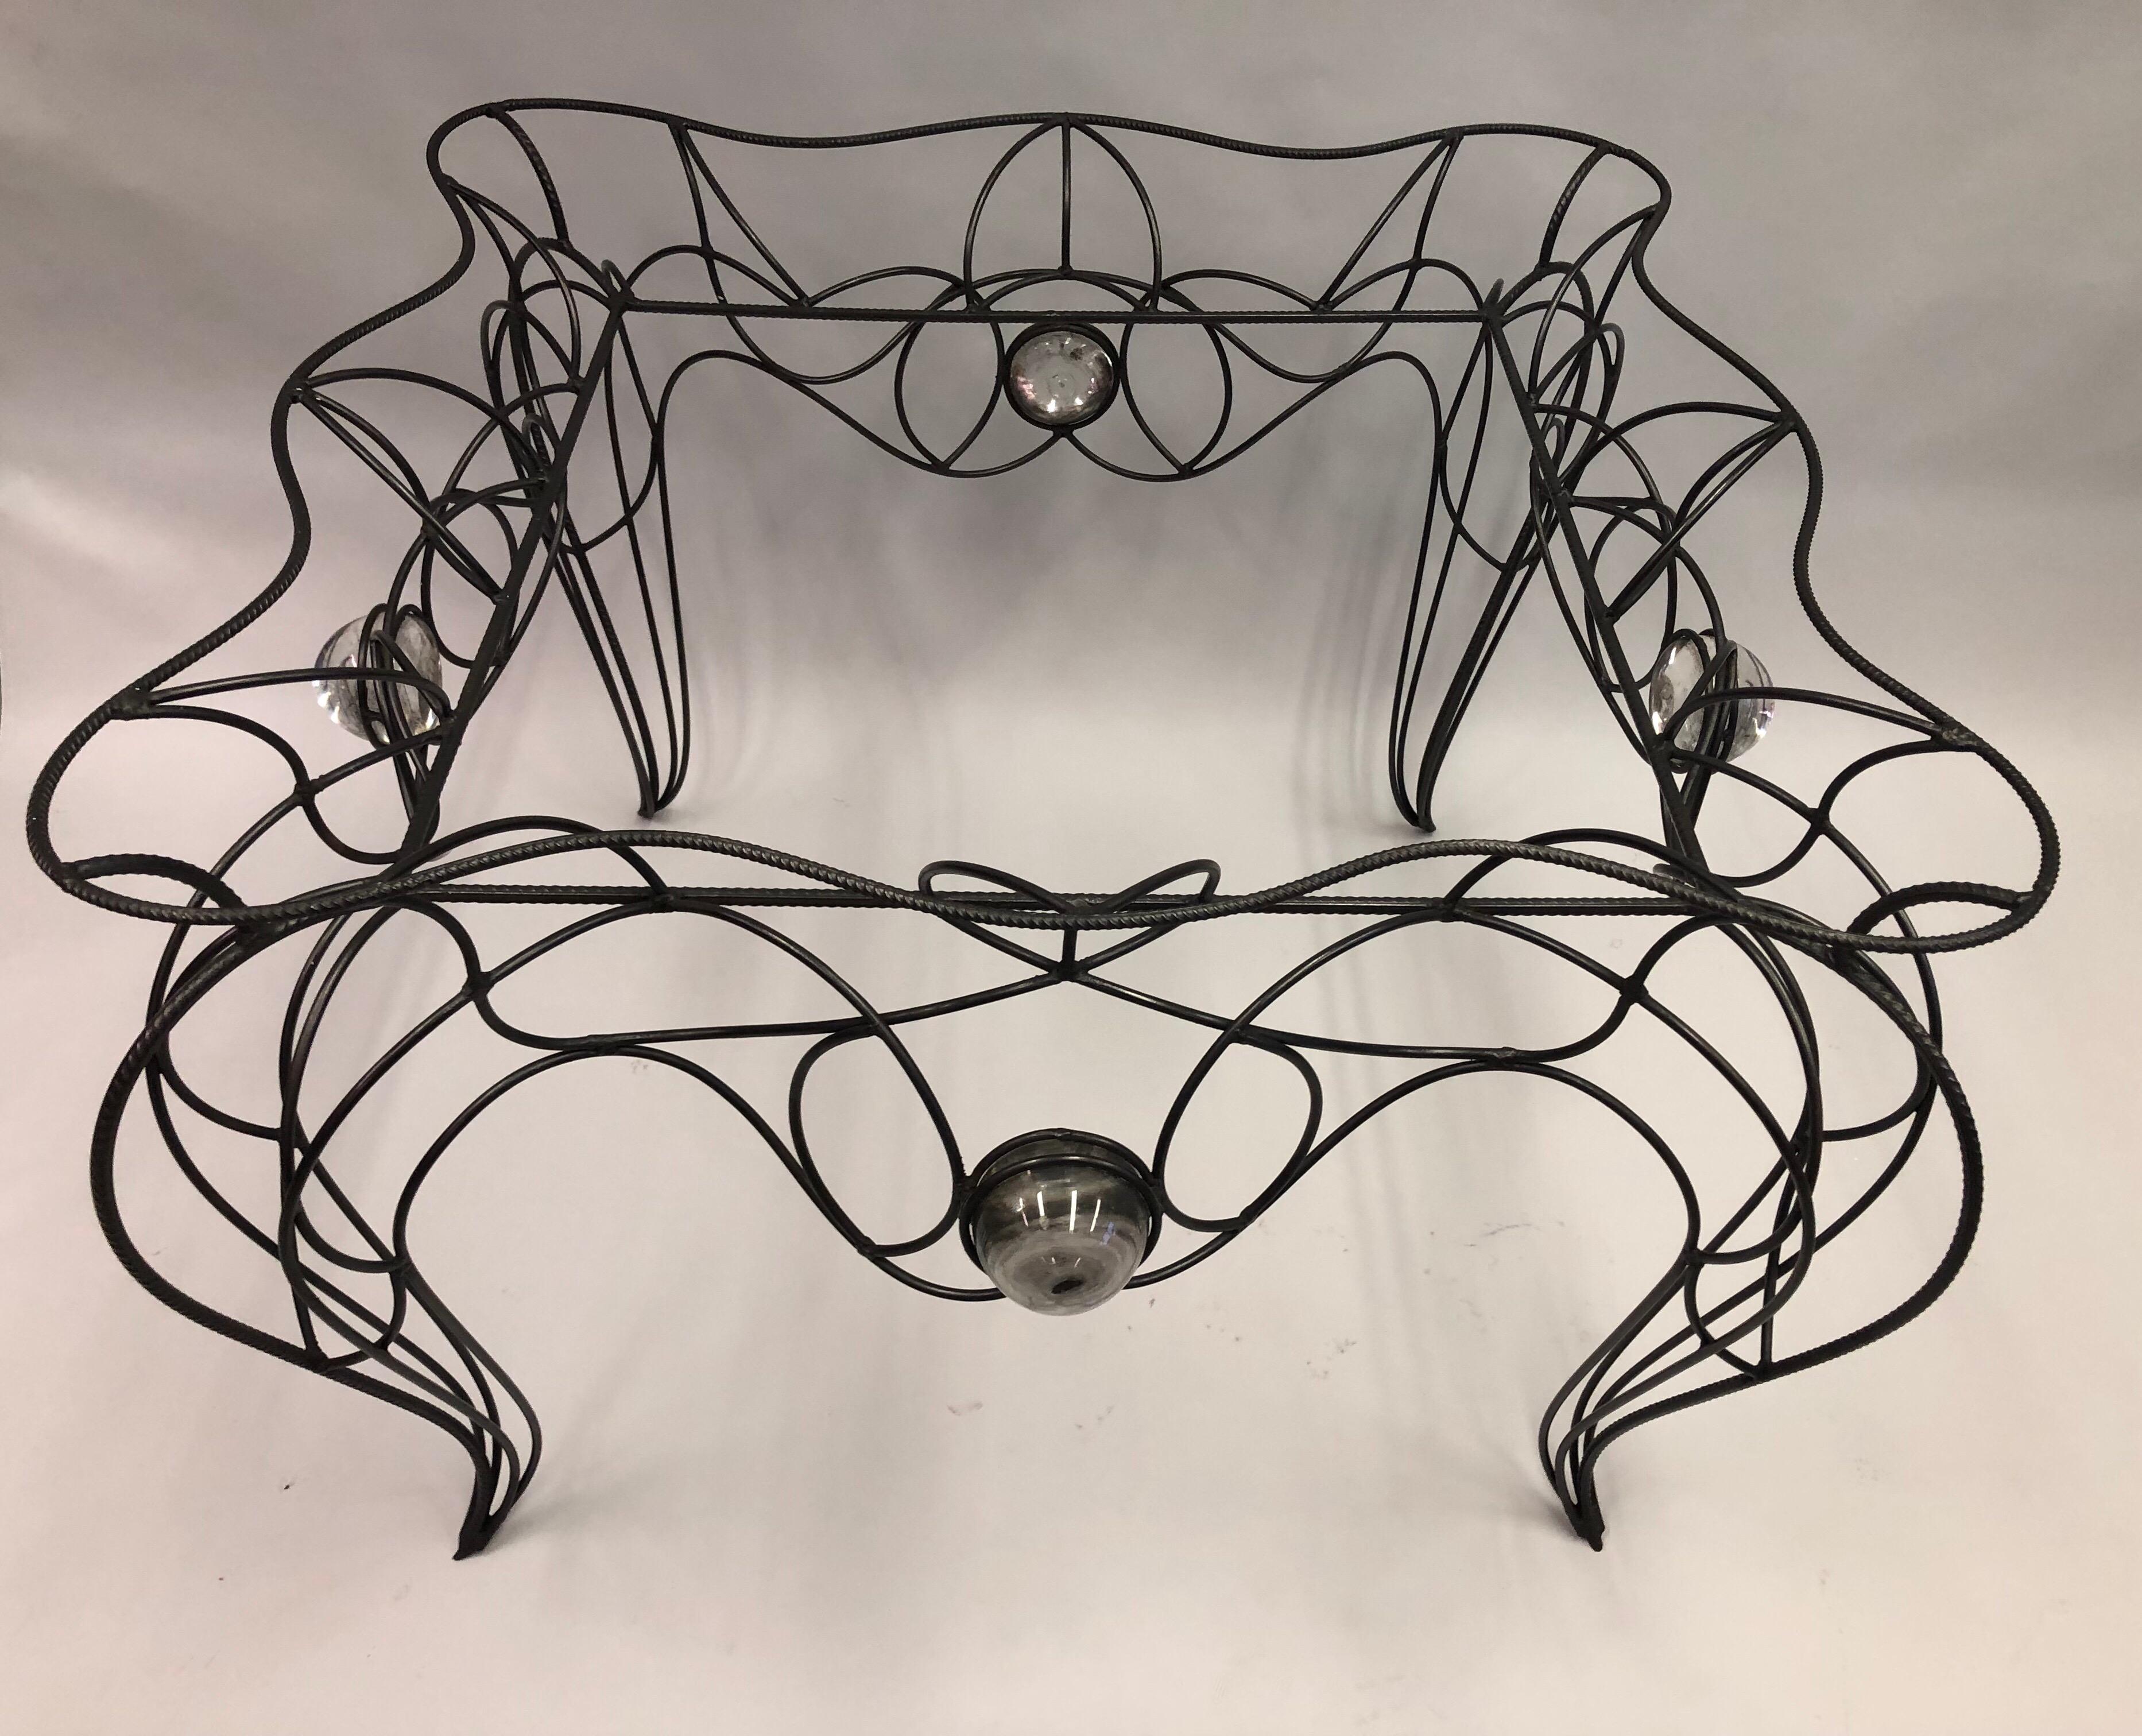 Modern Unique Centre Table / Console in Wrought Iron and Glass by Andre Dubreuil, 1986 For Sale